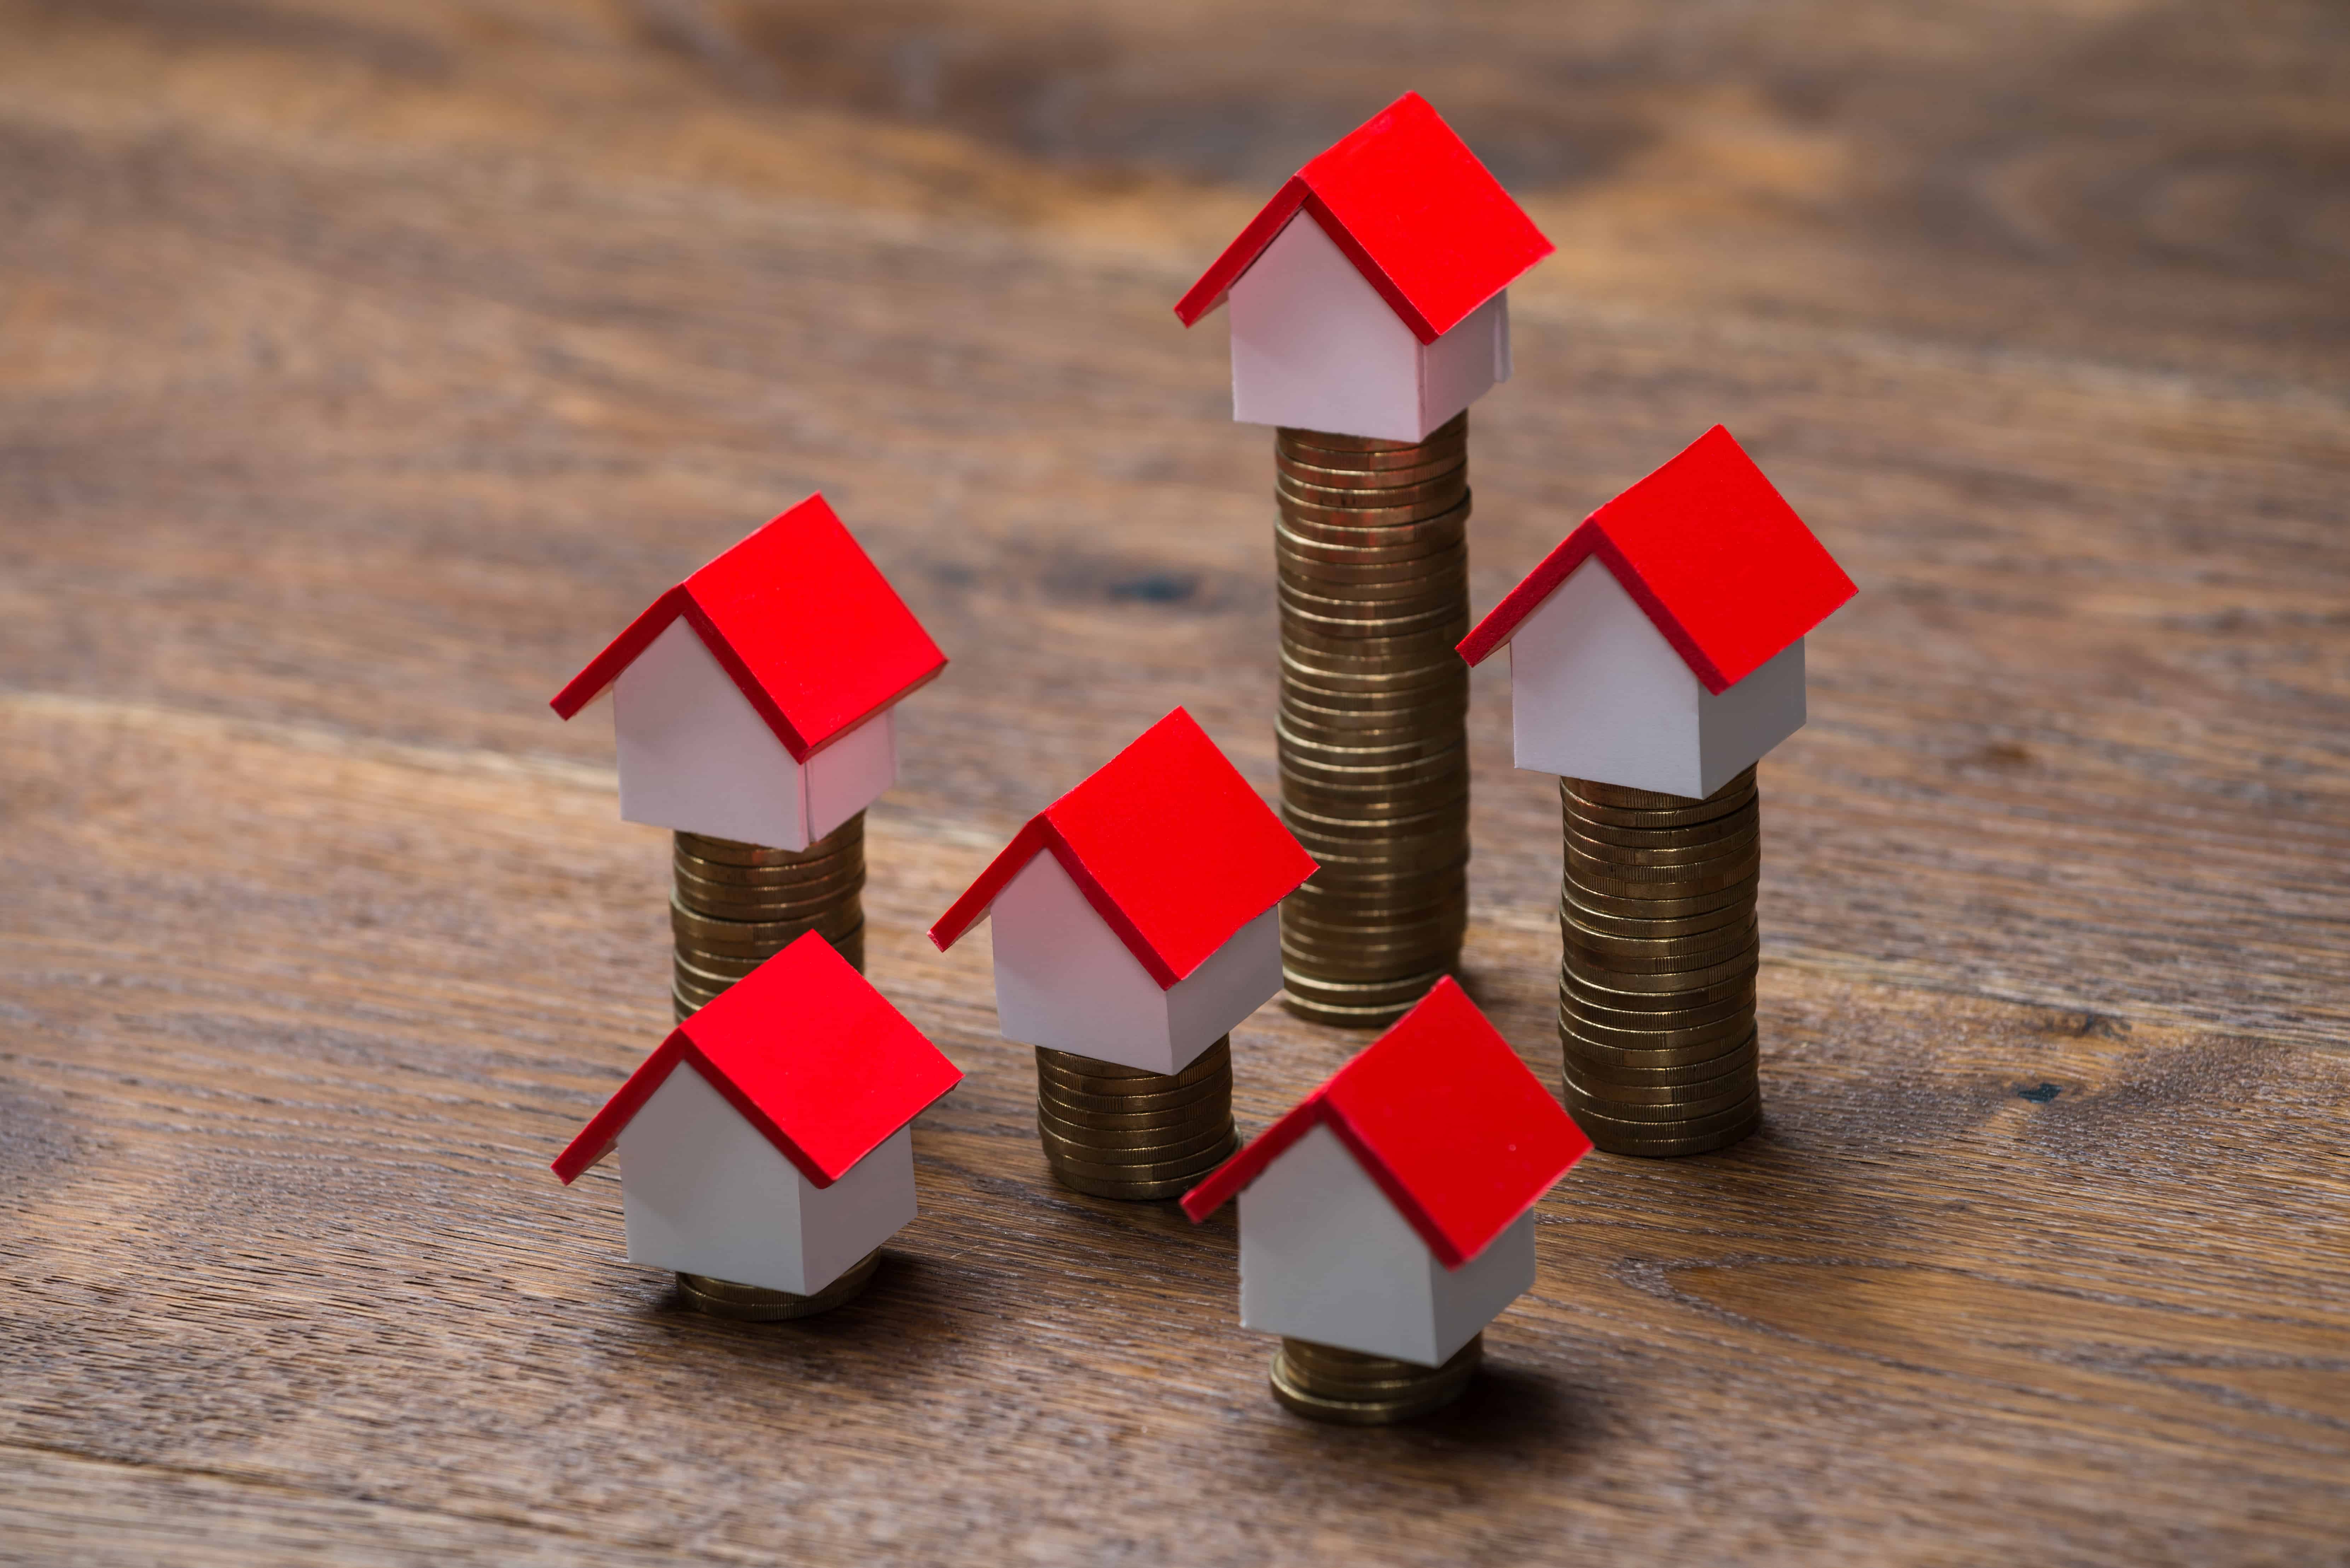 Equity available in UK homes exceeds £600bn